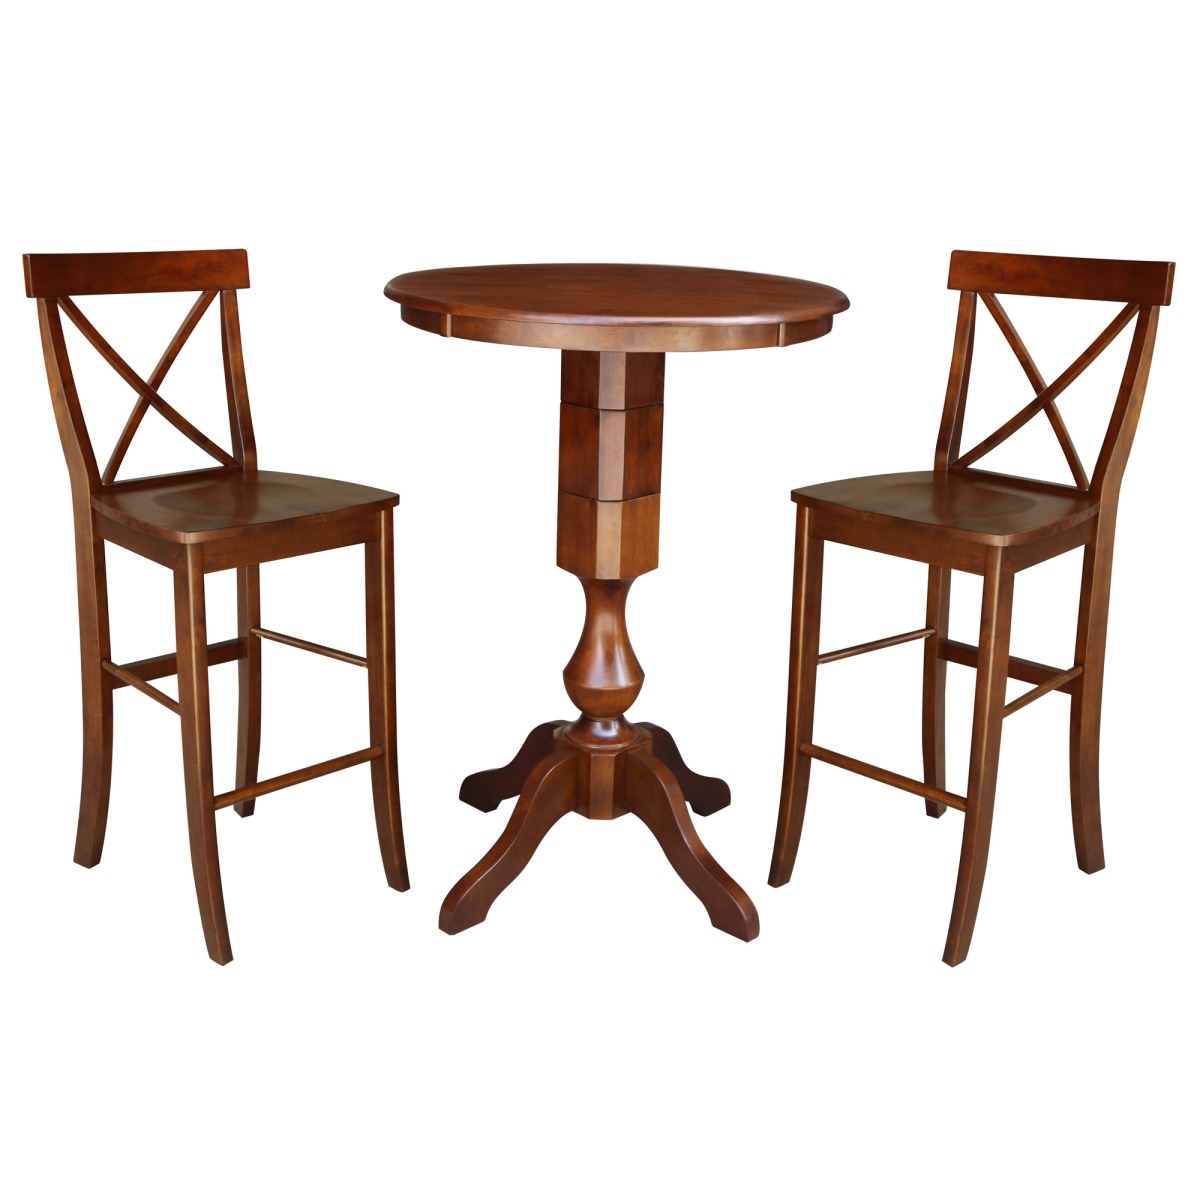 K581-30rt-11-s6133-2 30 In. Round Pedestal Bar Height Table With 2 Stools, Espresso - 3 Piece